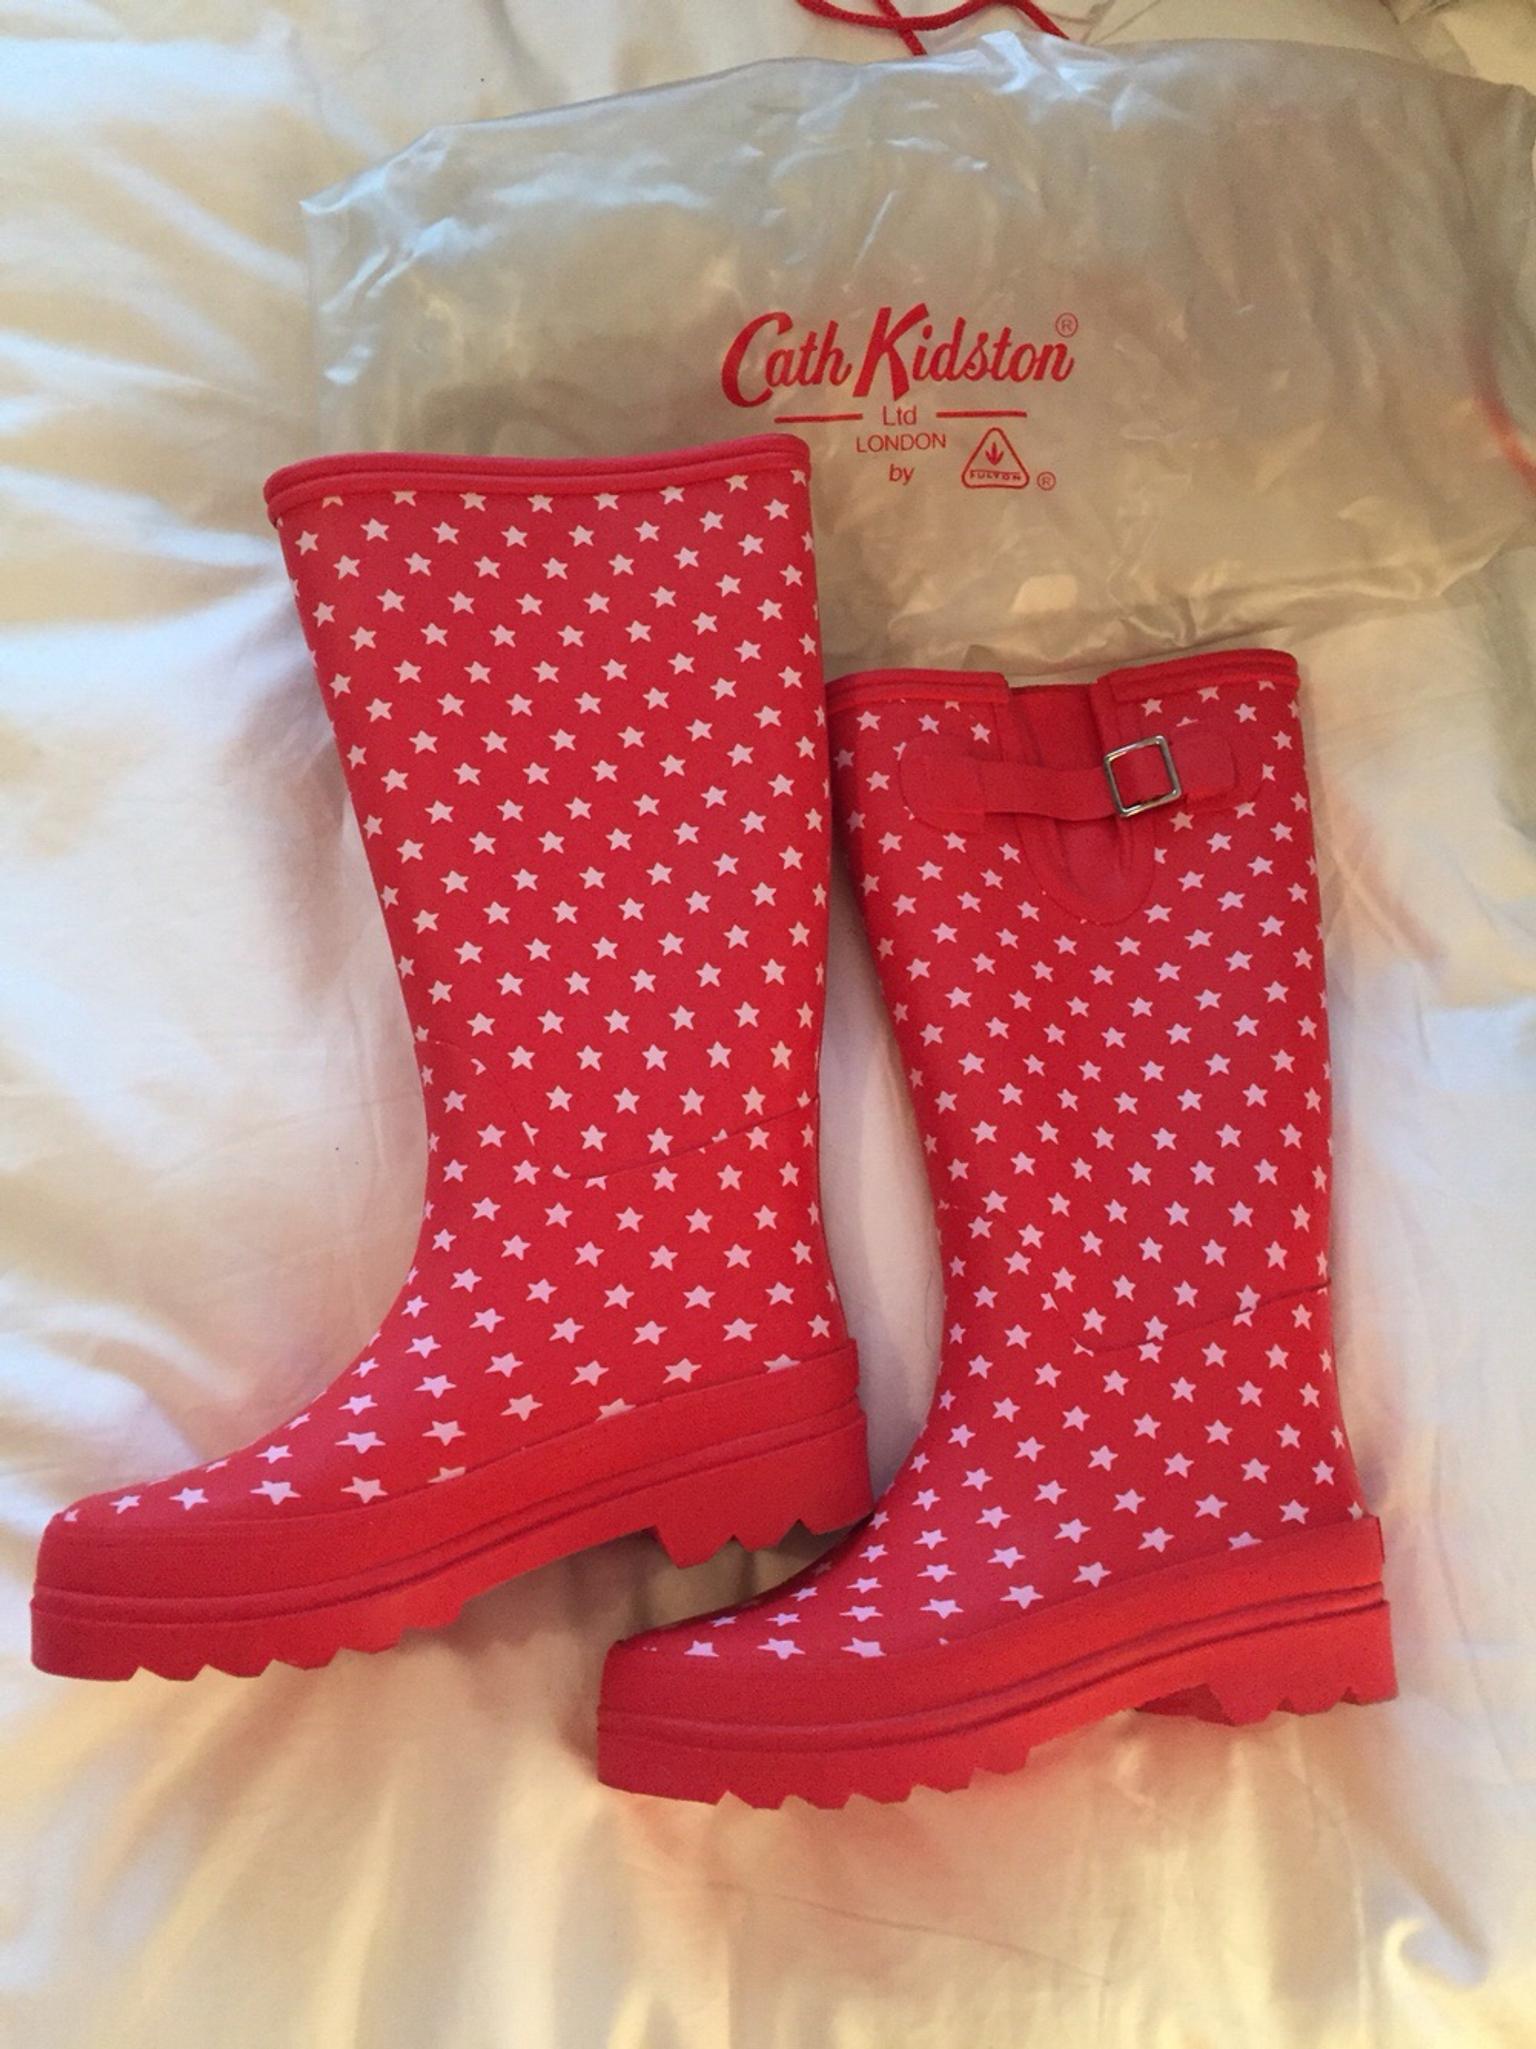 Cath Kidston Size 5 Red Wellies in SW17 